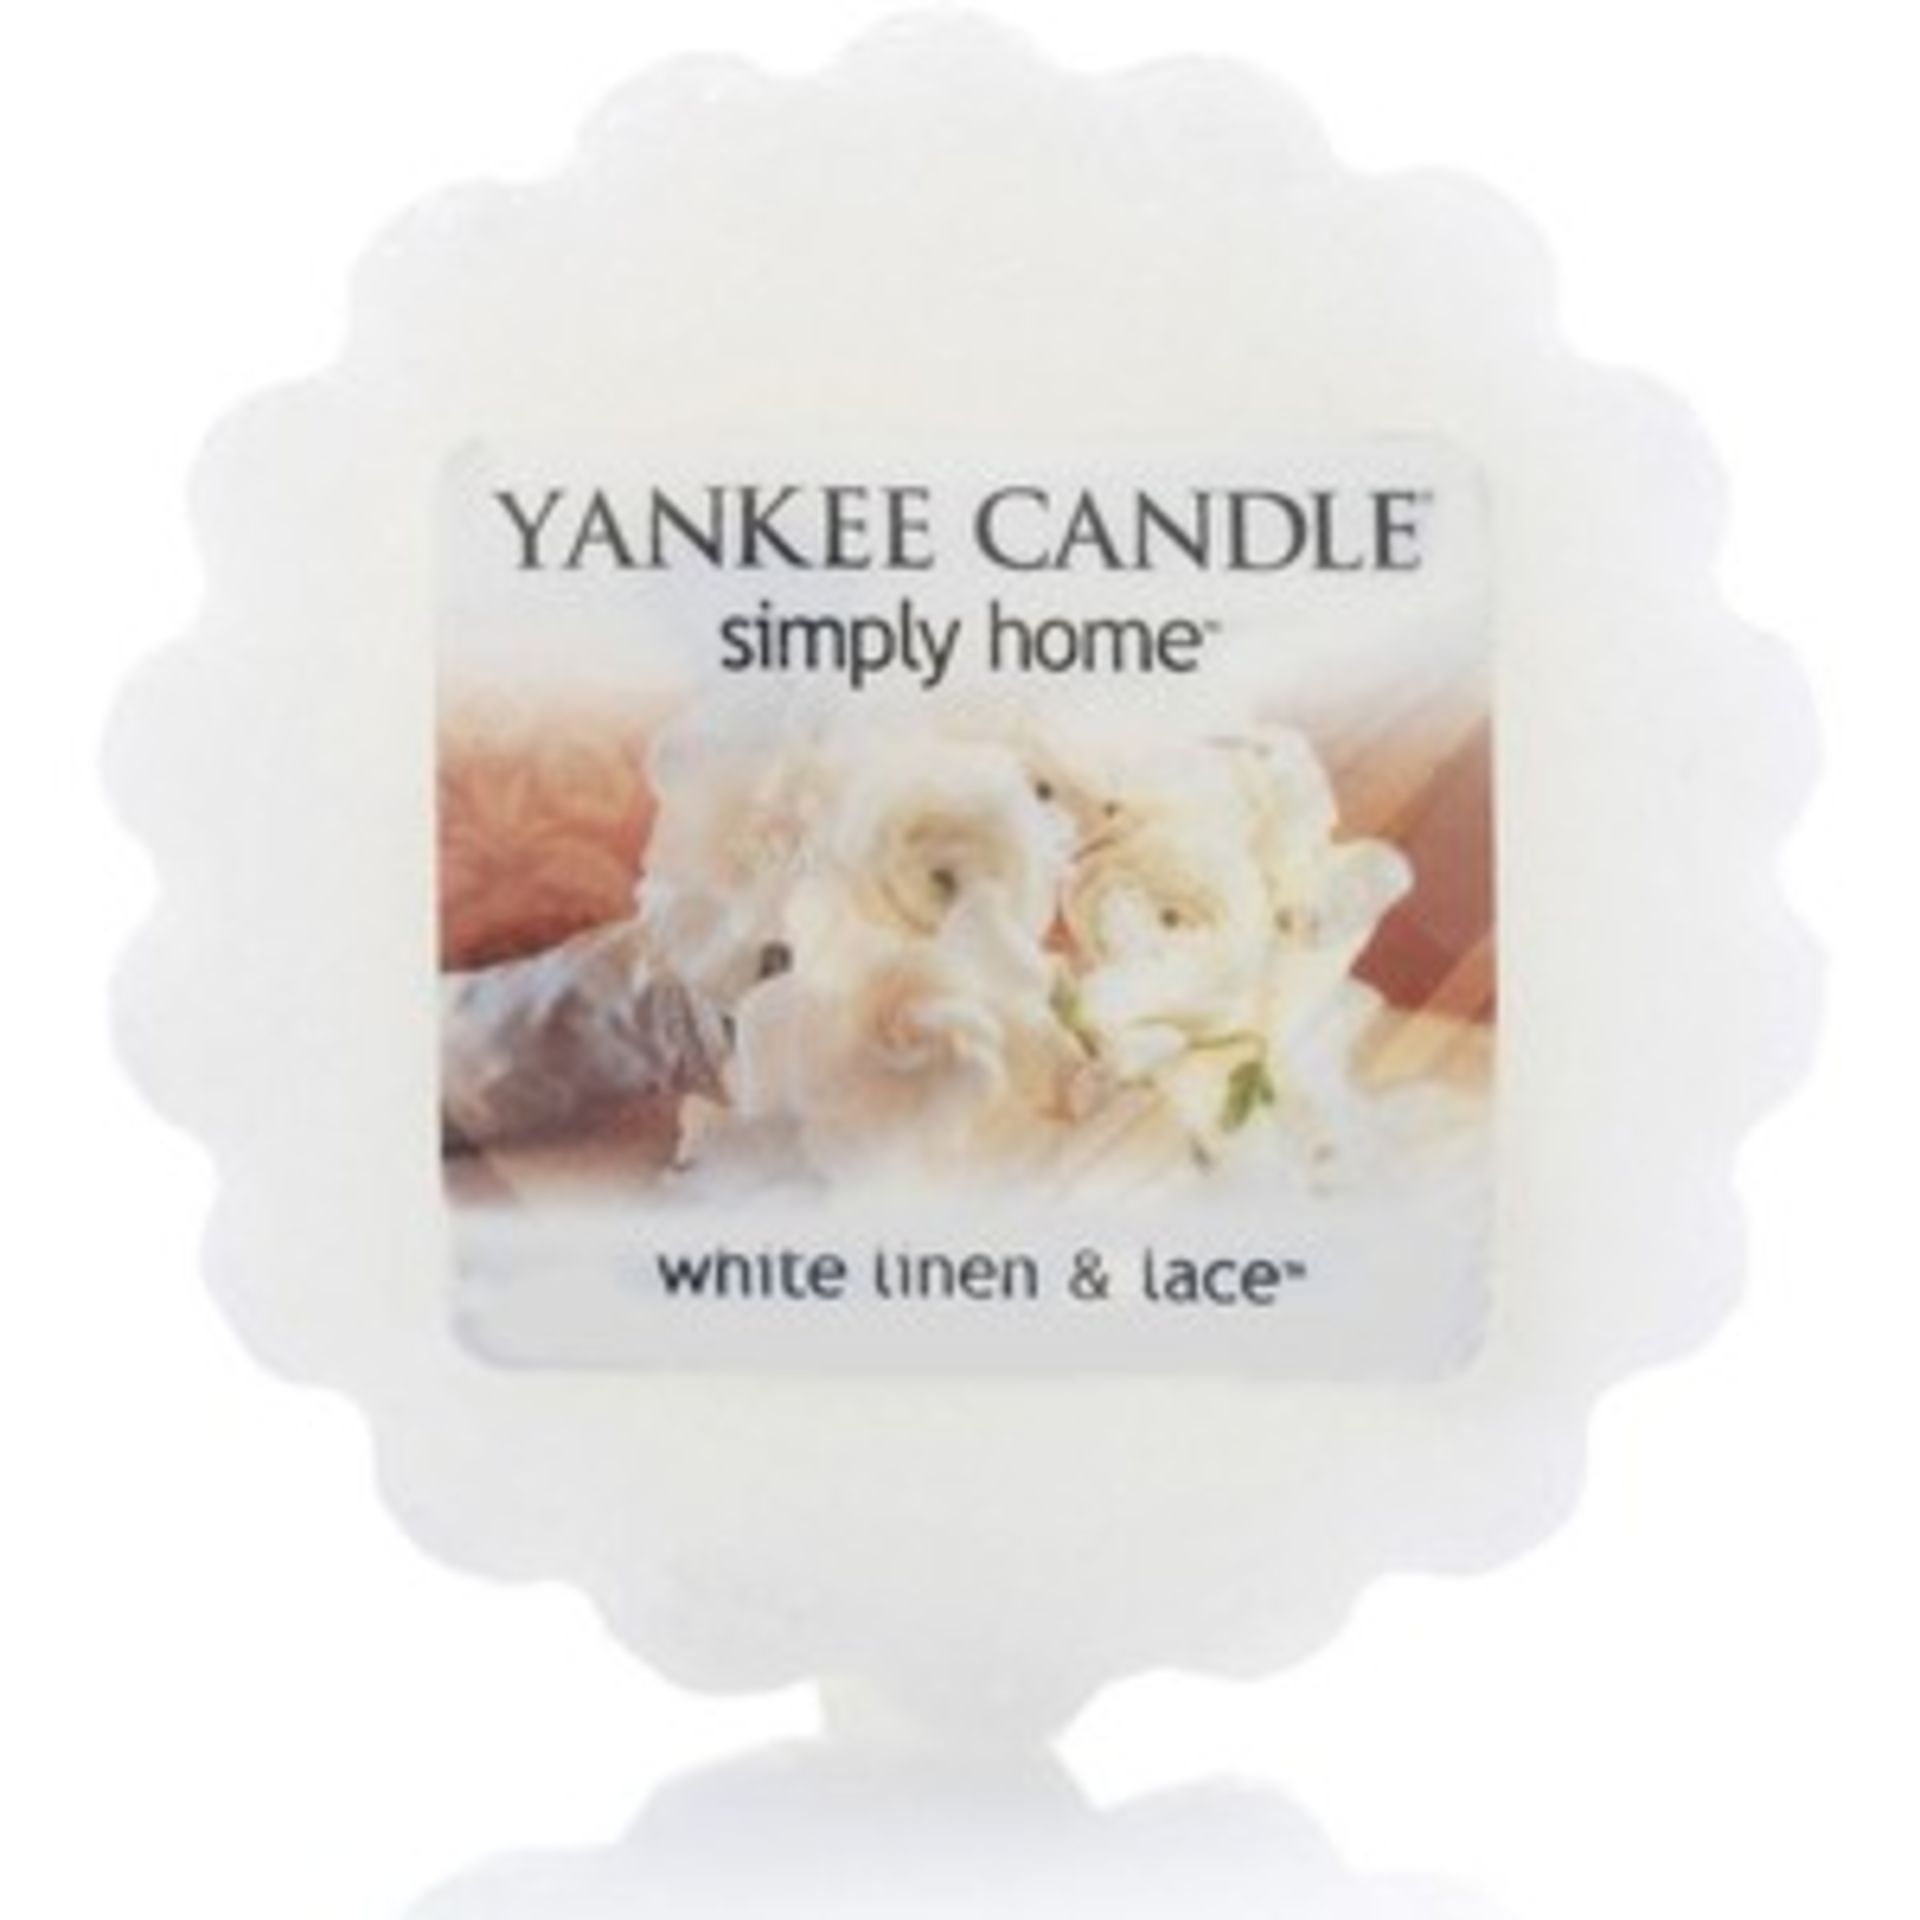 V Brand New 24 x Yankee Candle Tarts White Linen/Lace RRP: £35.76 X 2 YOUR BID PRICE TO BE